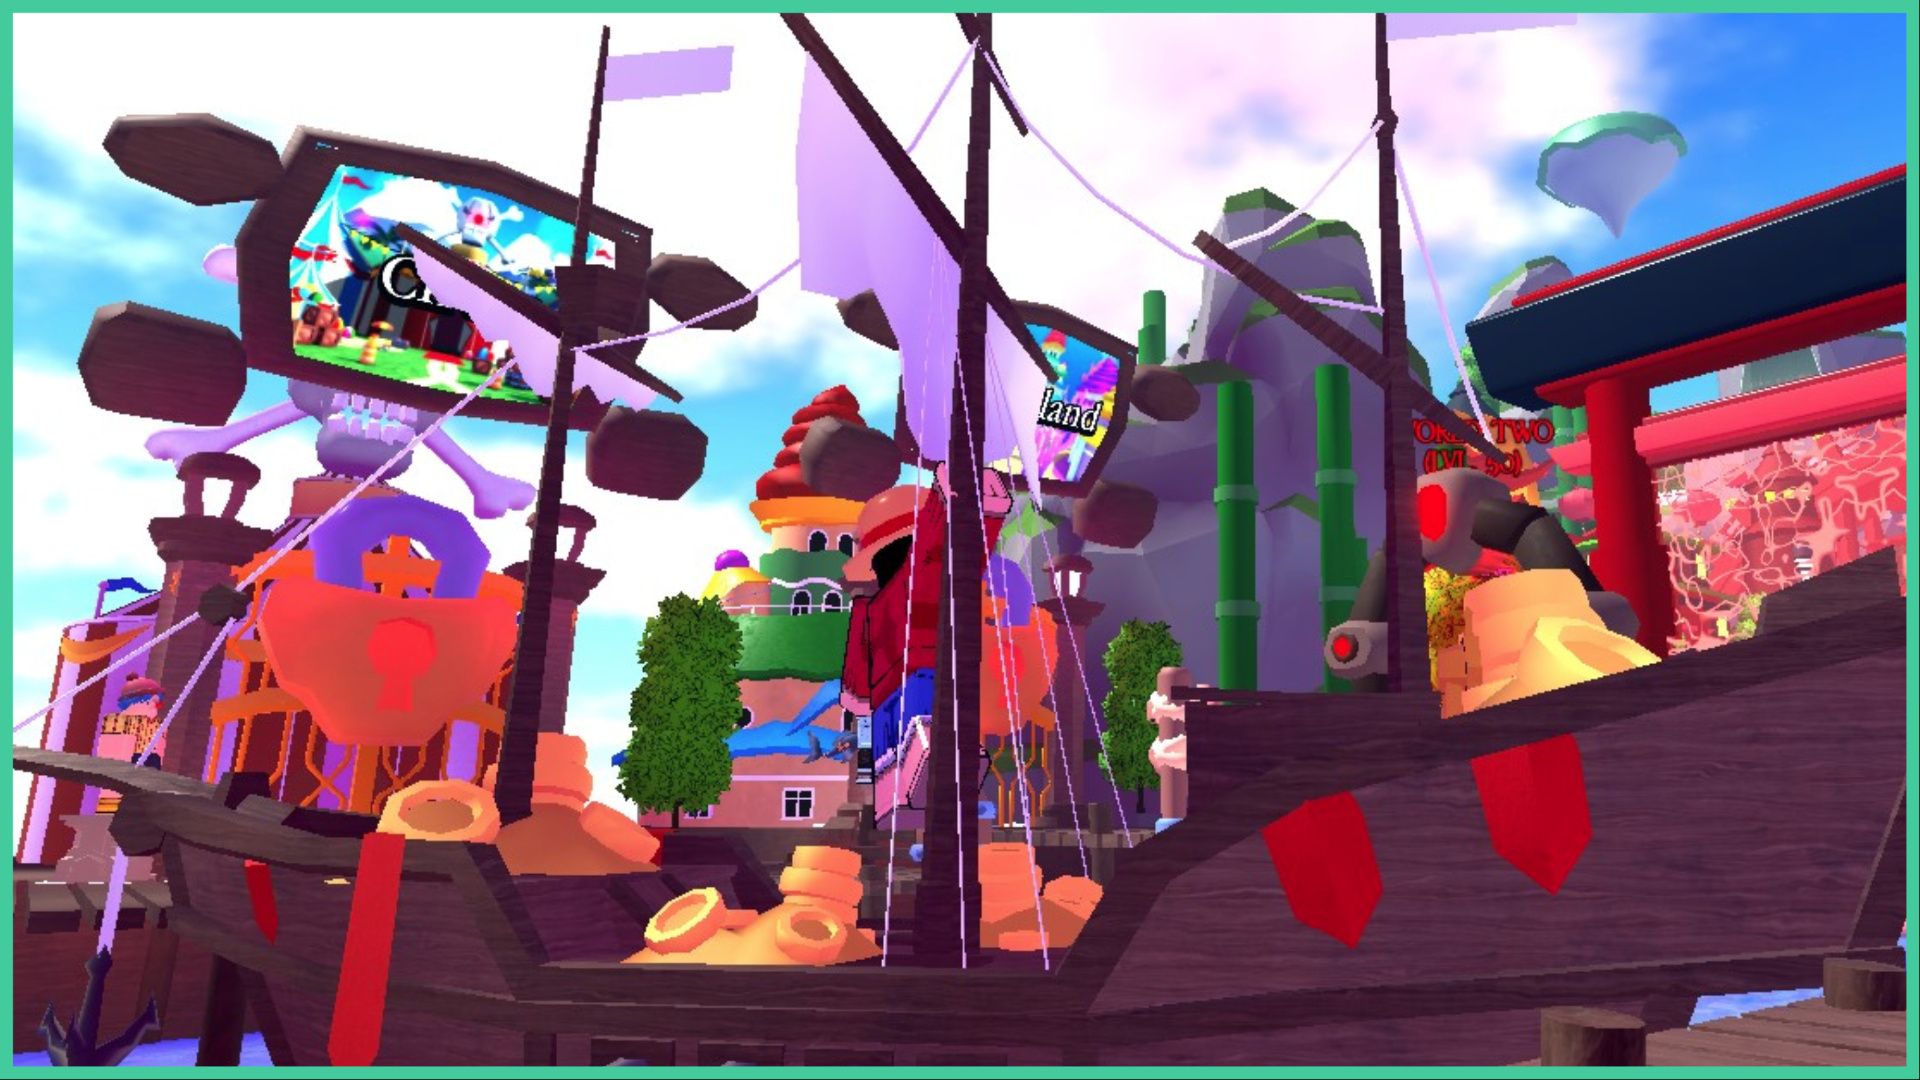 feature image for our fruit tower defense tier list, the image is a screenshot from the game of a pirate ship which has a large roblox version of luffy standing on it, the boat is full of piles of golden treasure